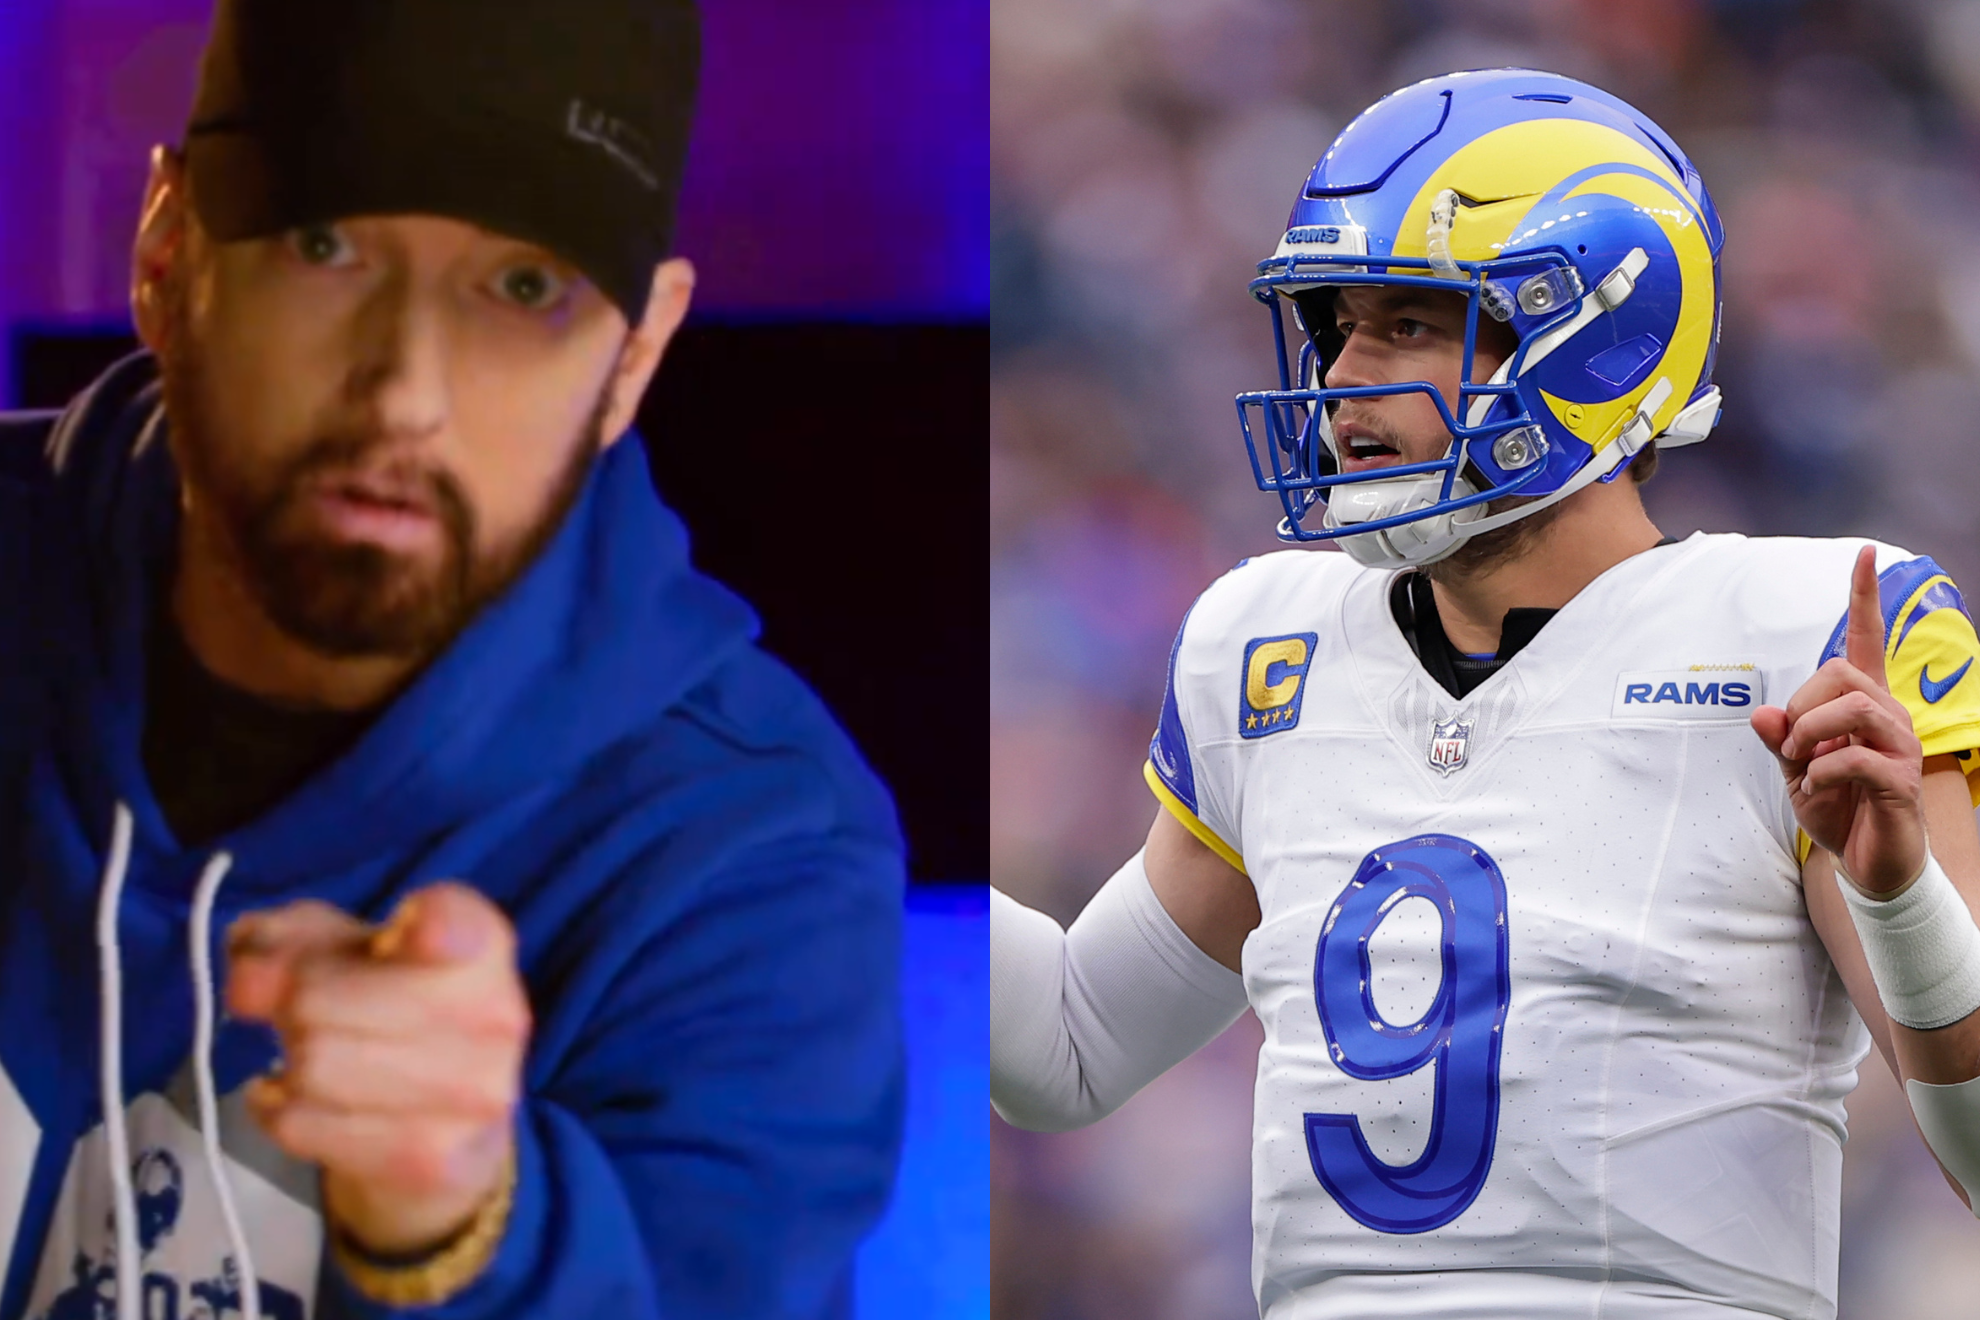 Eminem just wants his Lions to win.